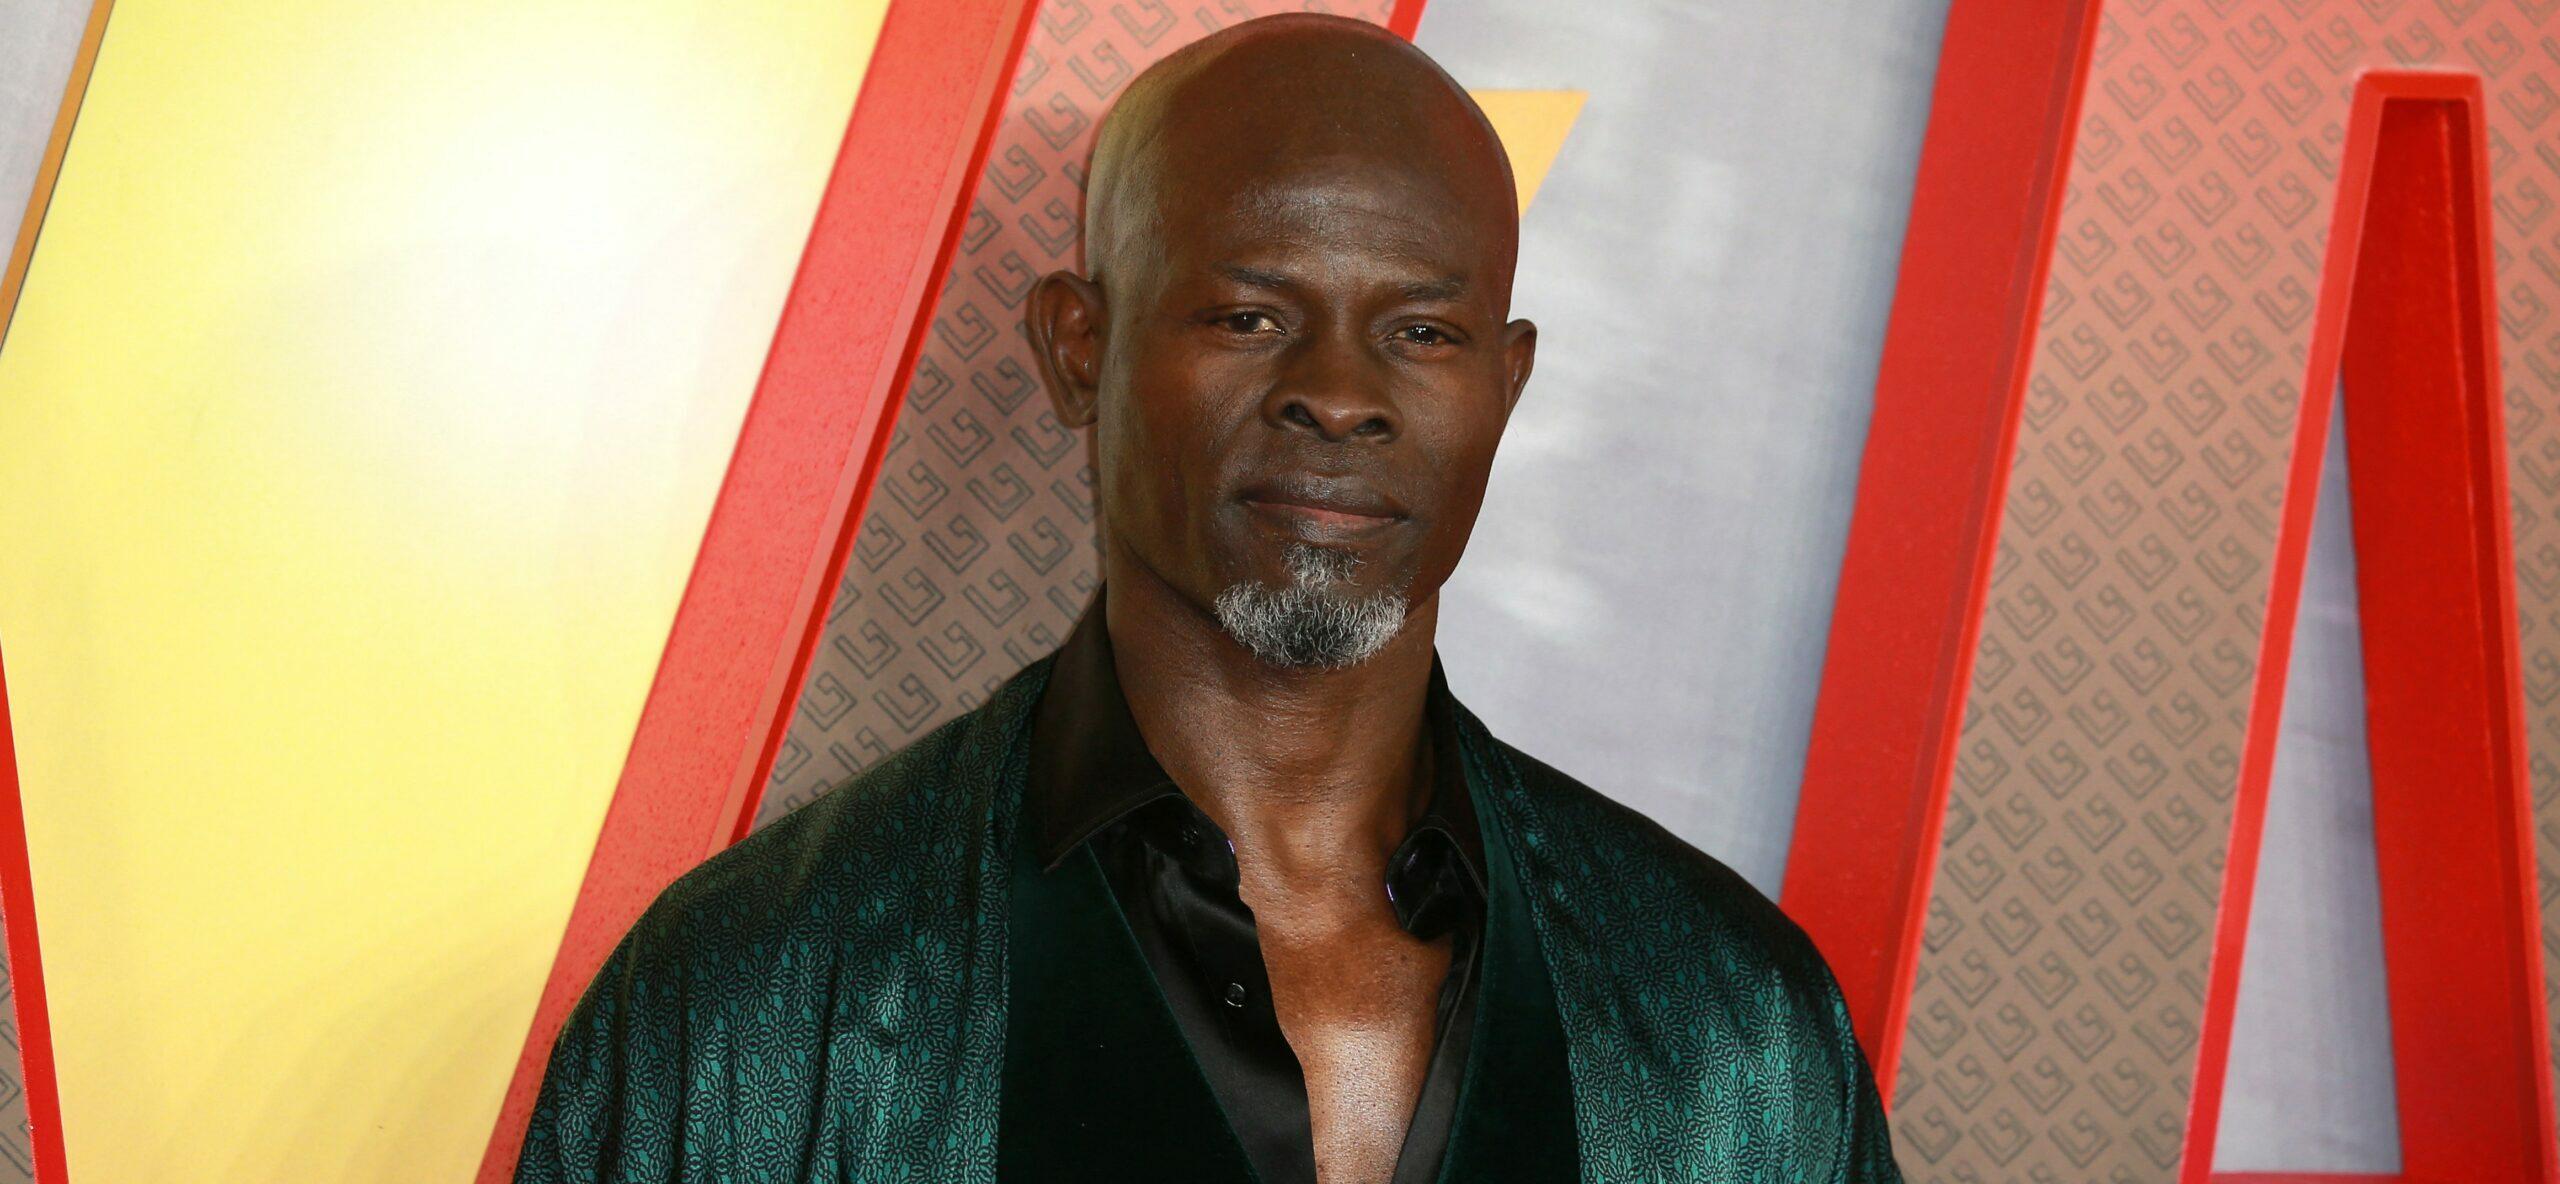 Djimon Hounsou Says He Has Never Been Paid Well Enough For Any Film, Feels 'Tremendously Cheated' By Hollywood